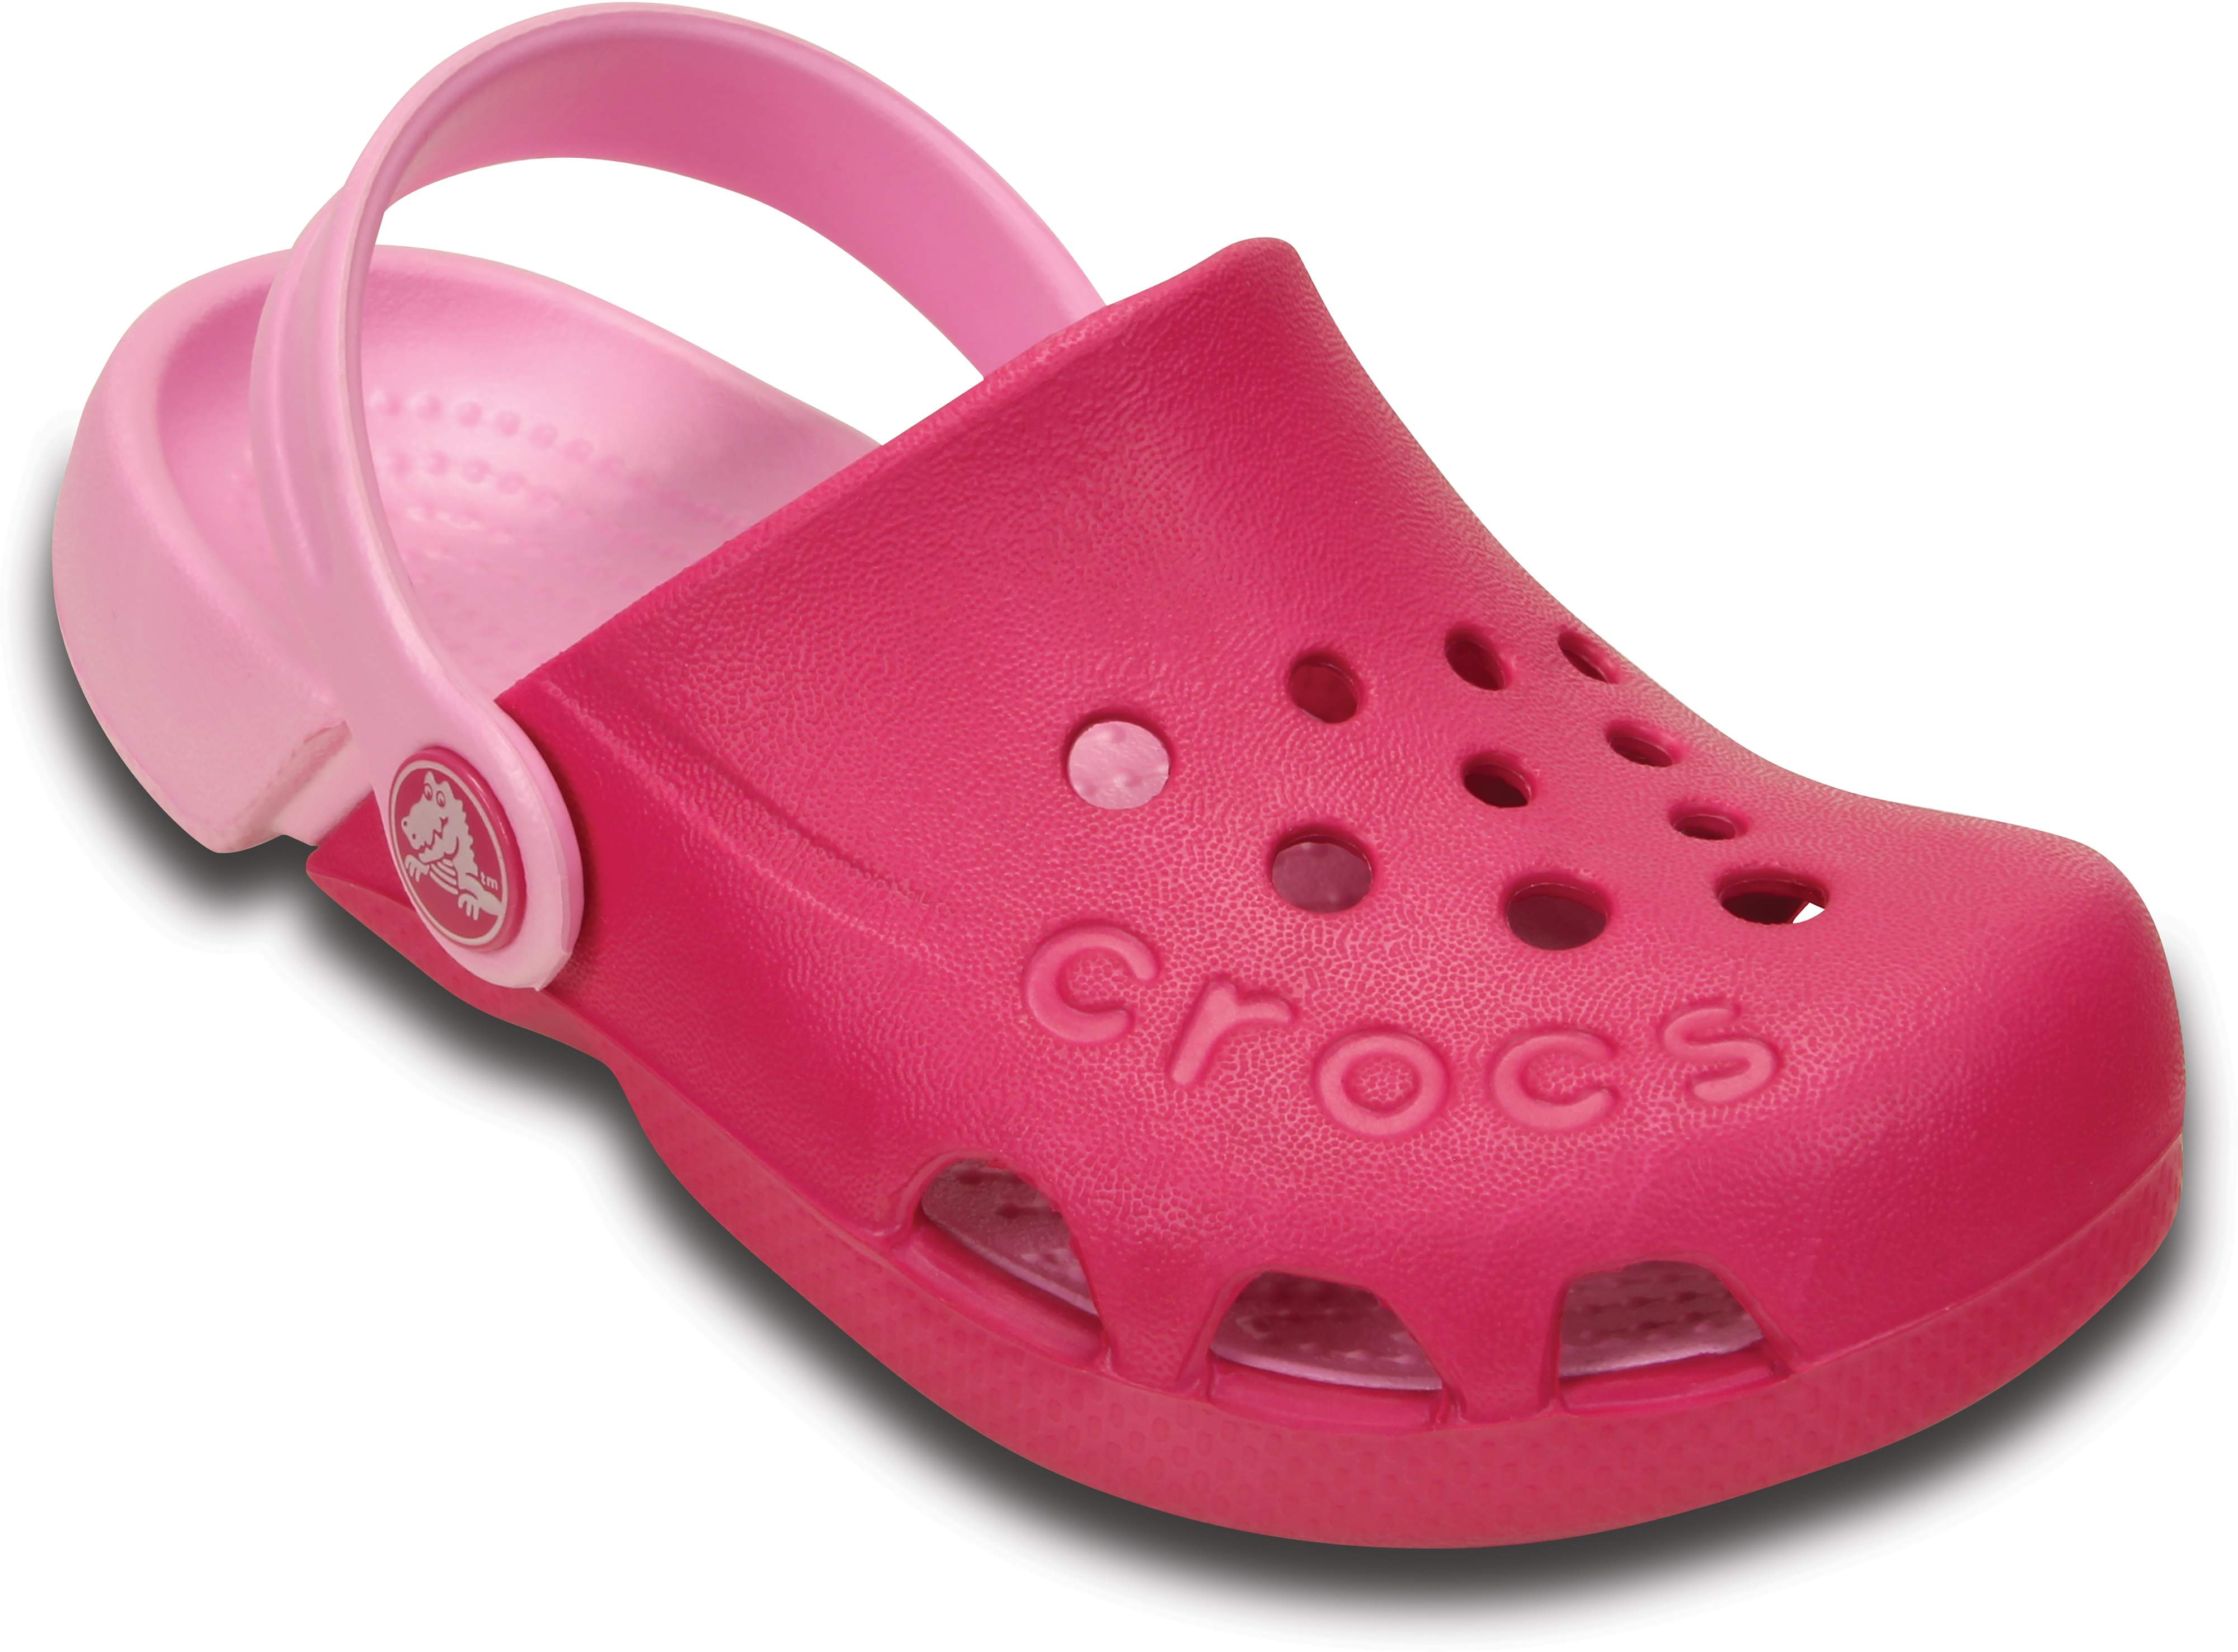 croc baby shoes